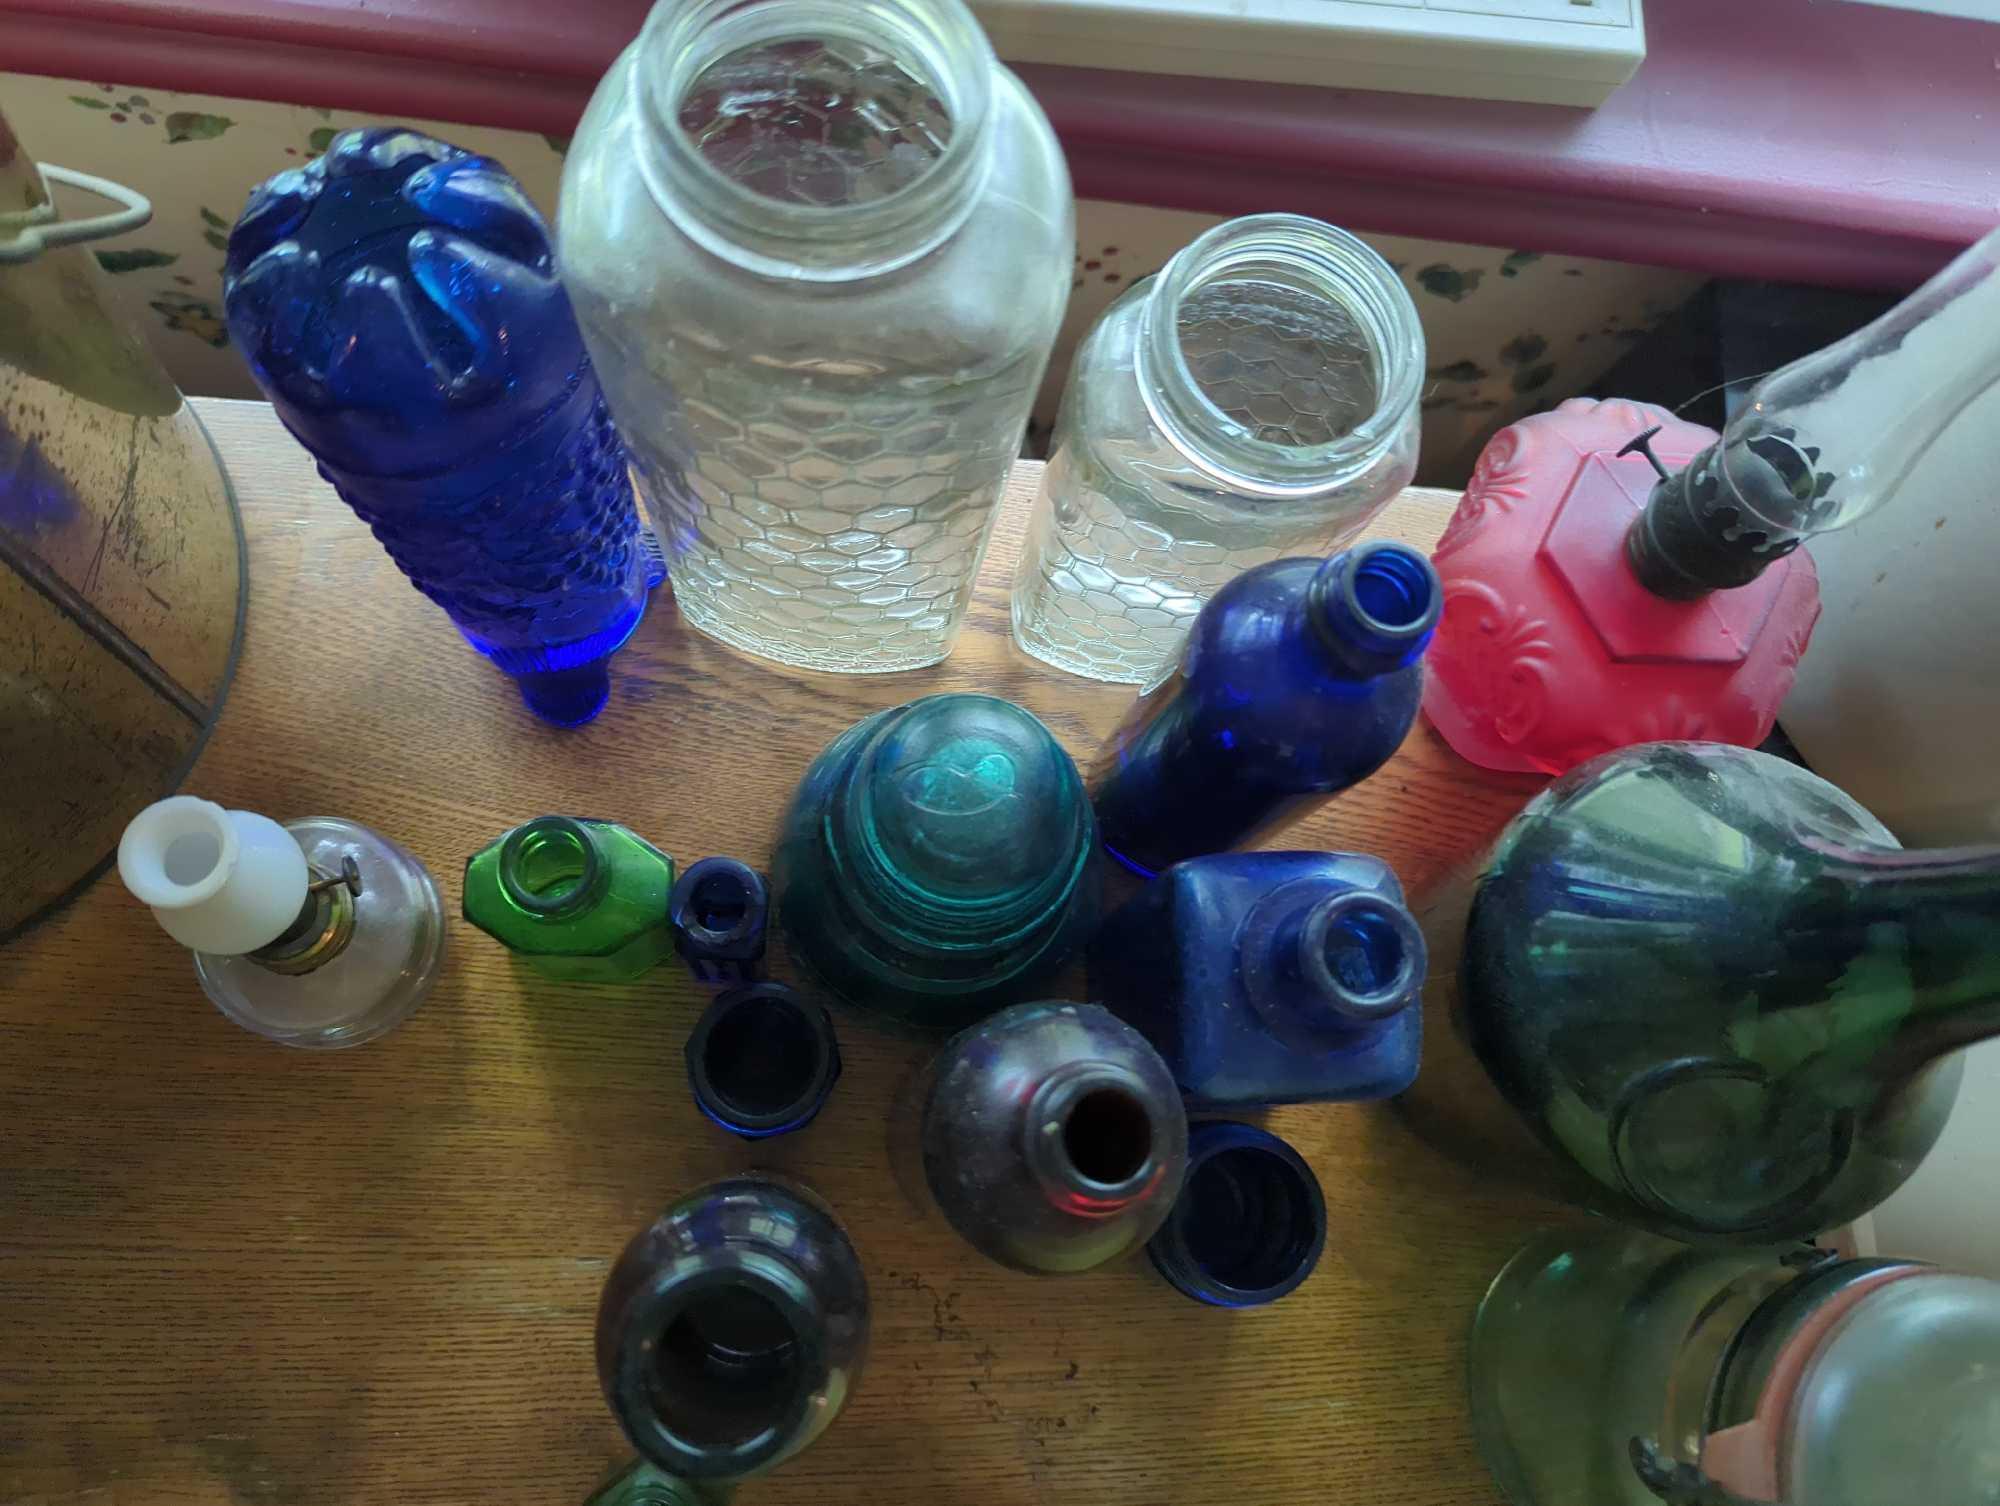 (DR) LOT OF 18 ASSORTED GLASS JARS AND GLASS BOTTLES, WHAT YOU SEE IN THE PHOTOS IS EXACTLY WHAT